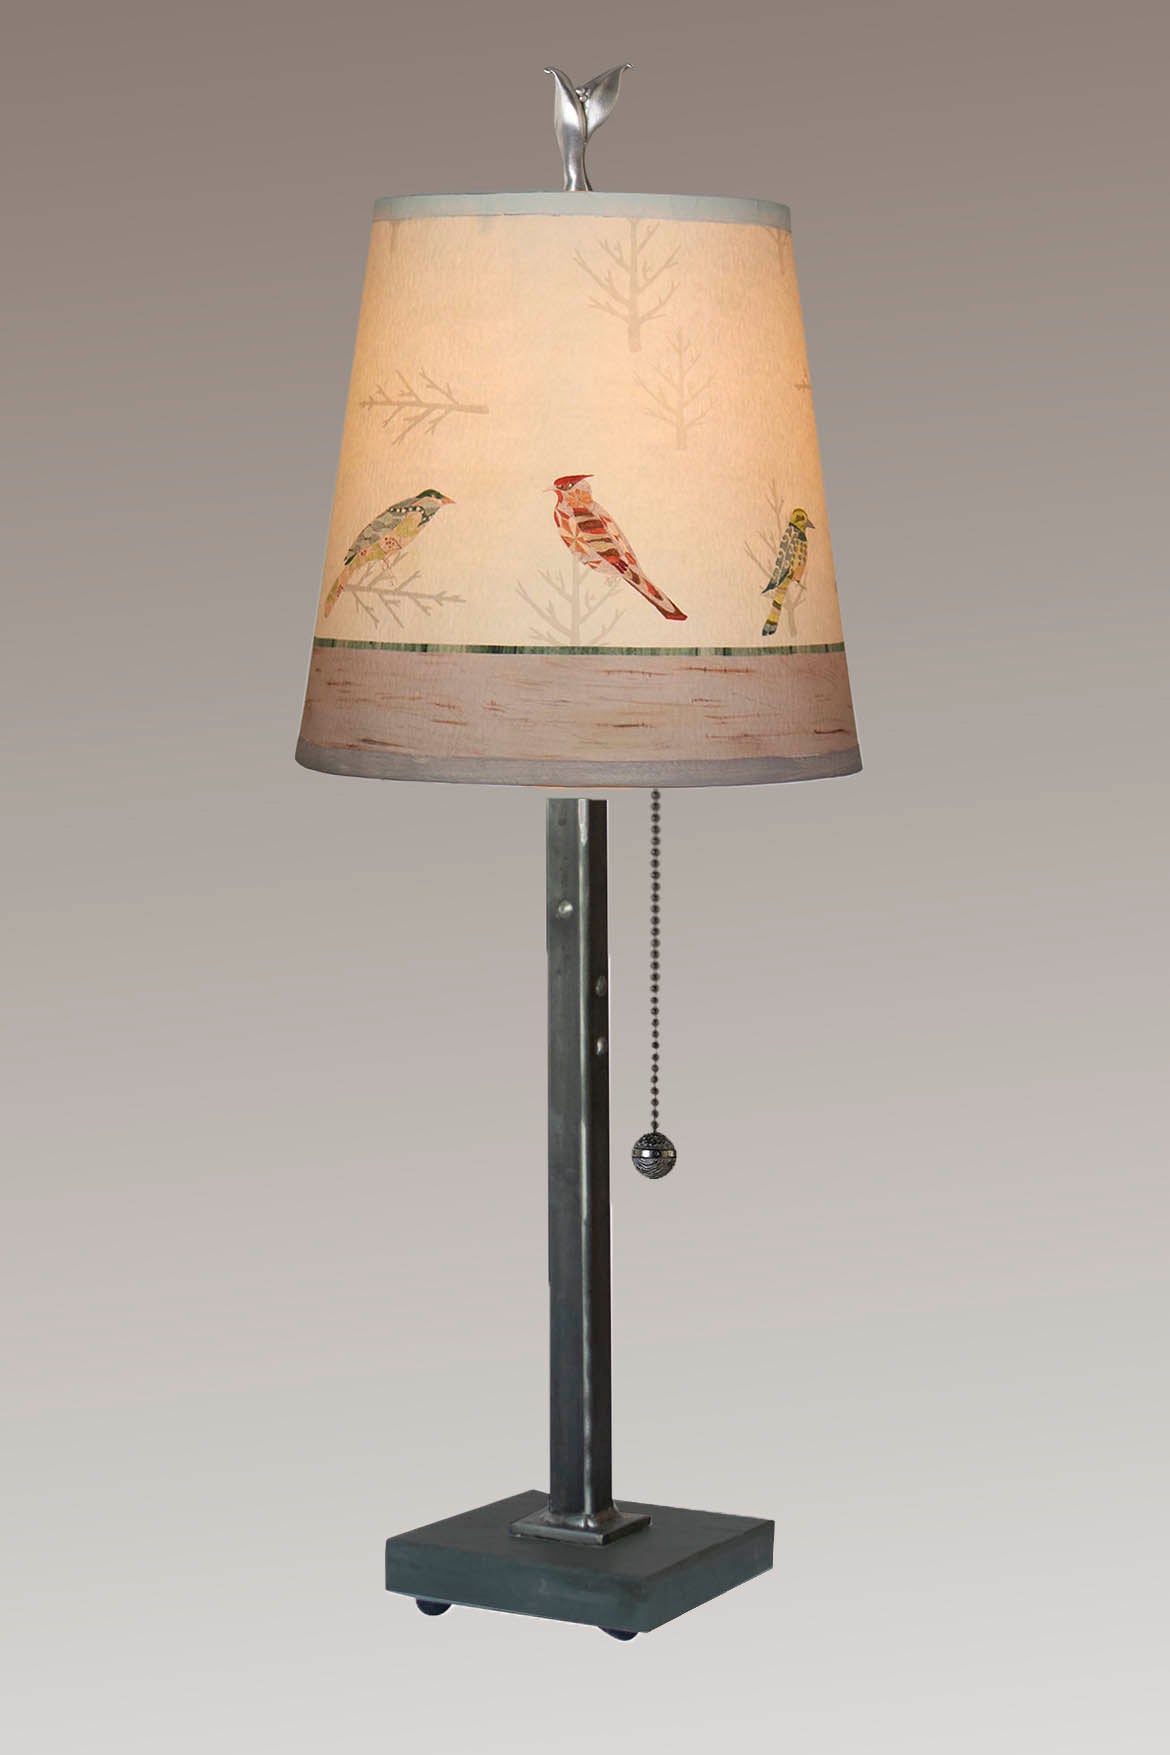 Janna Ugone &amp; Co Table Lamp Steel Table Lamp with Small Drum Shade in Bird Friends